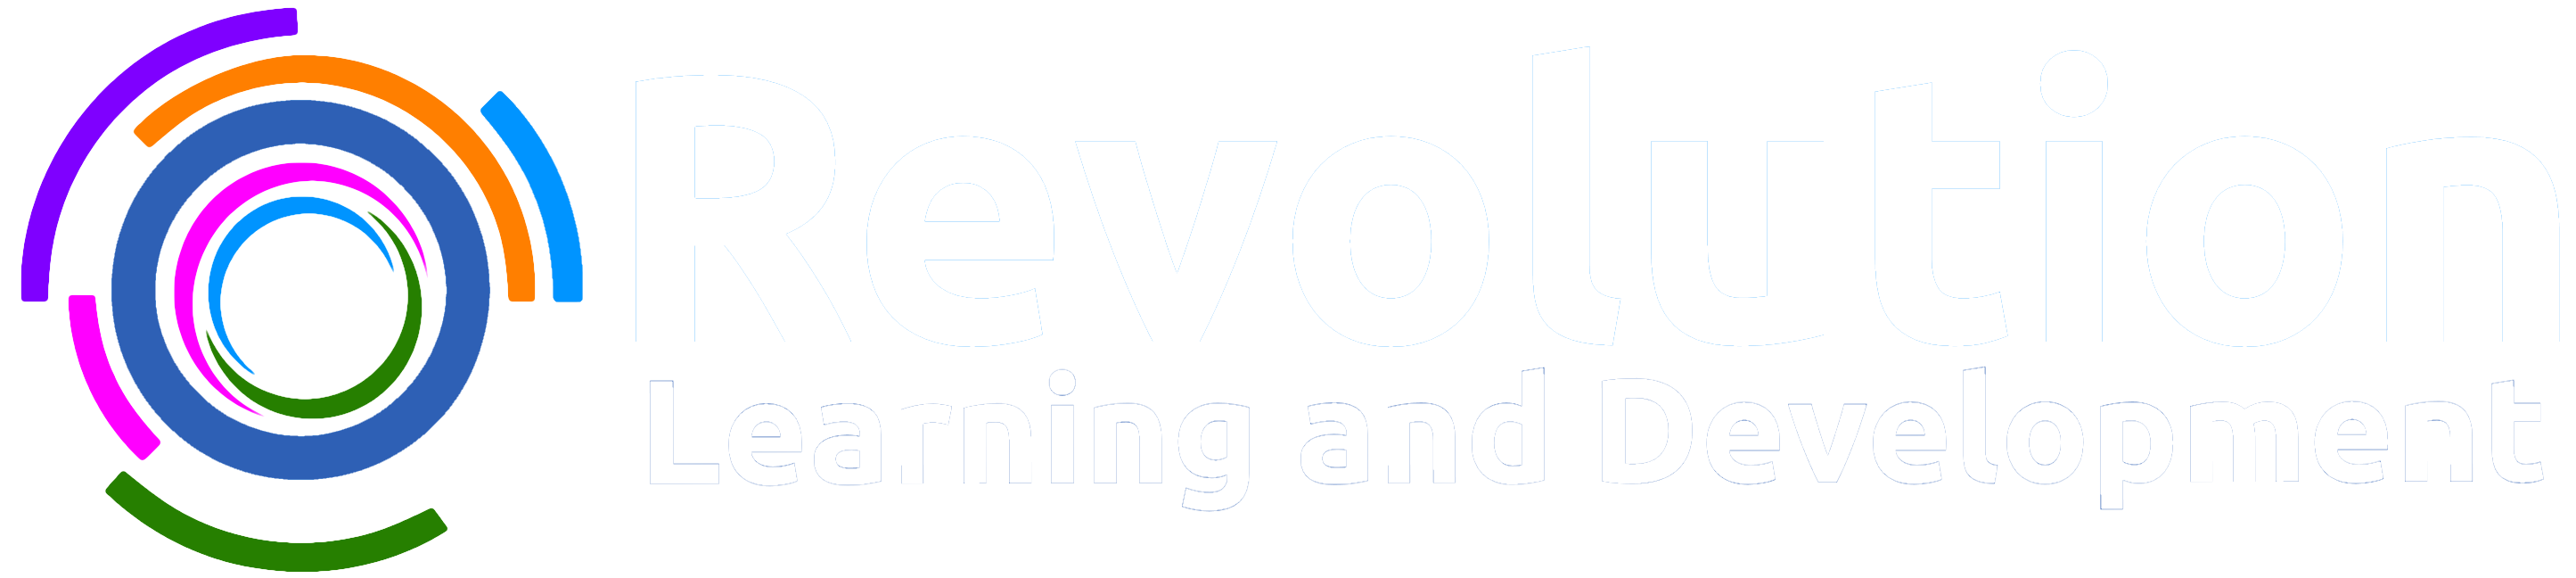 Revolution Learning and Development – Poland